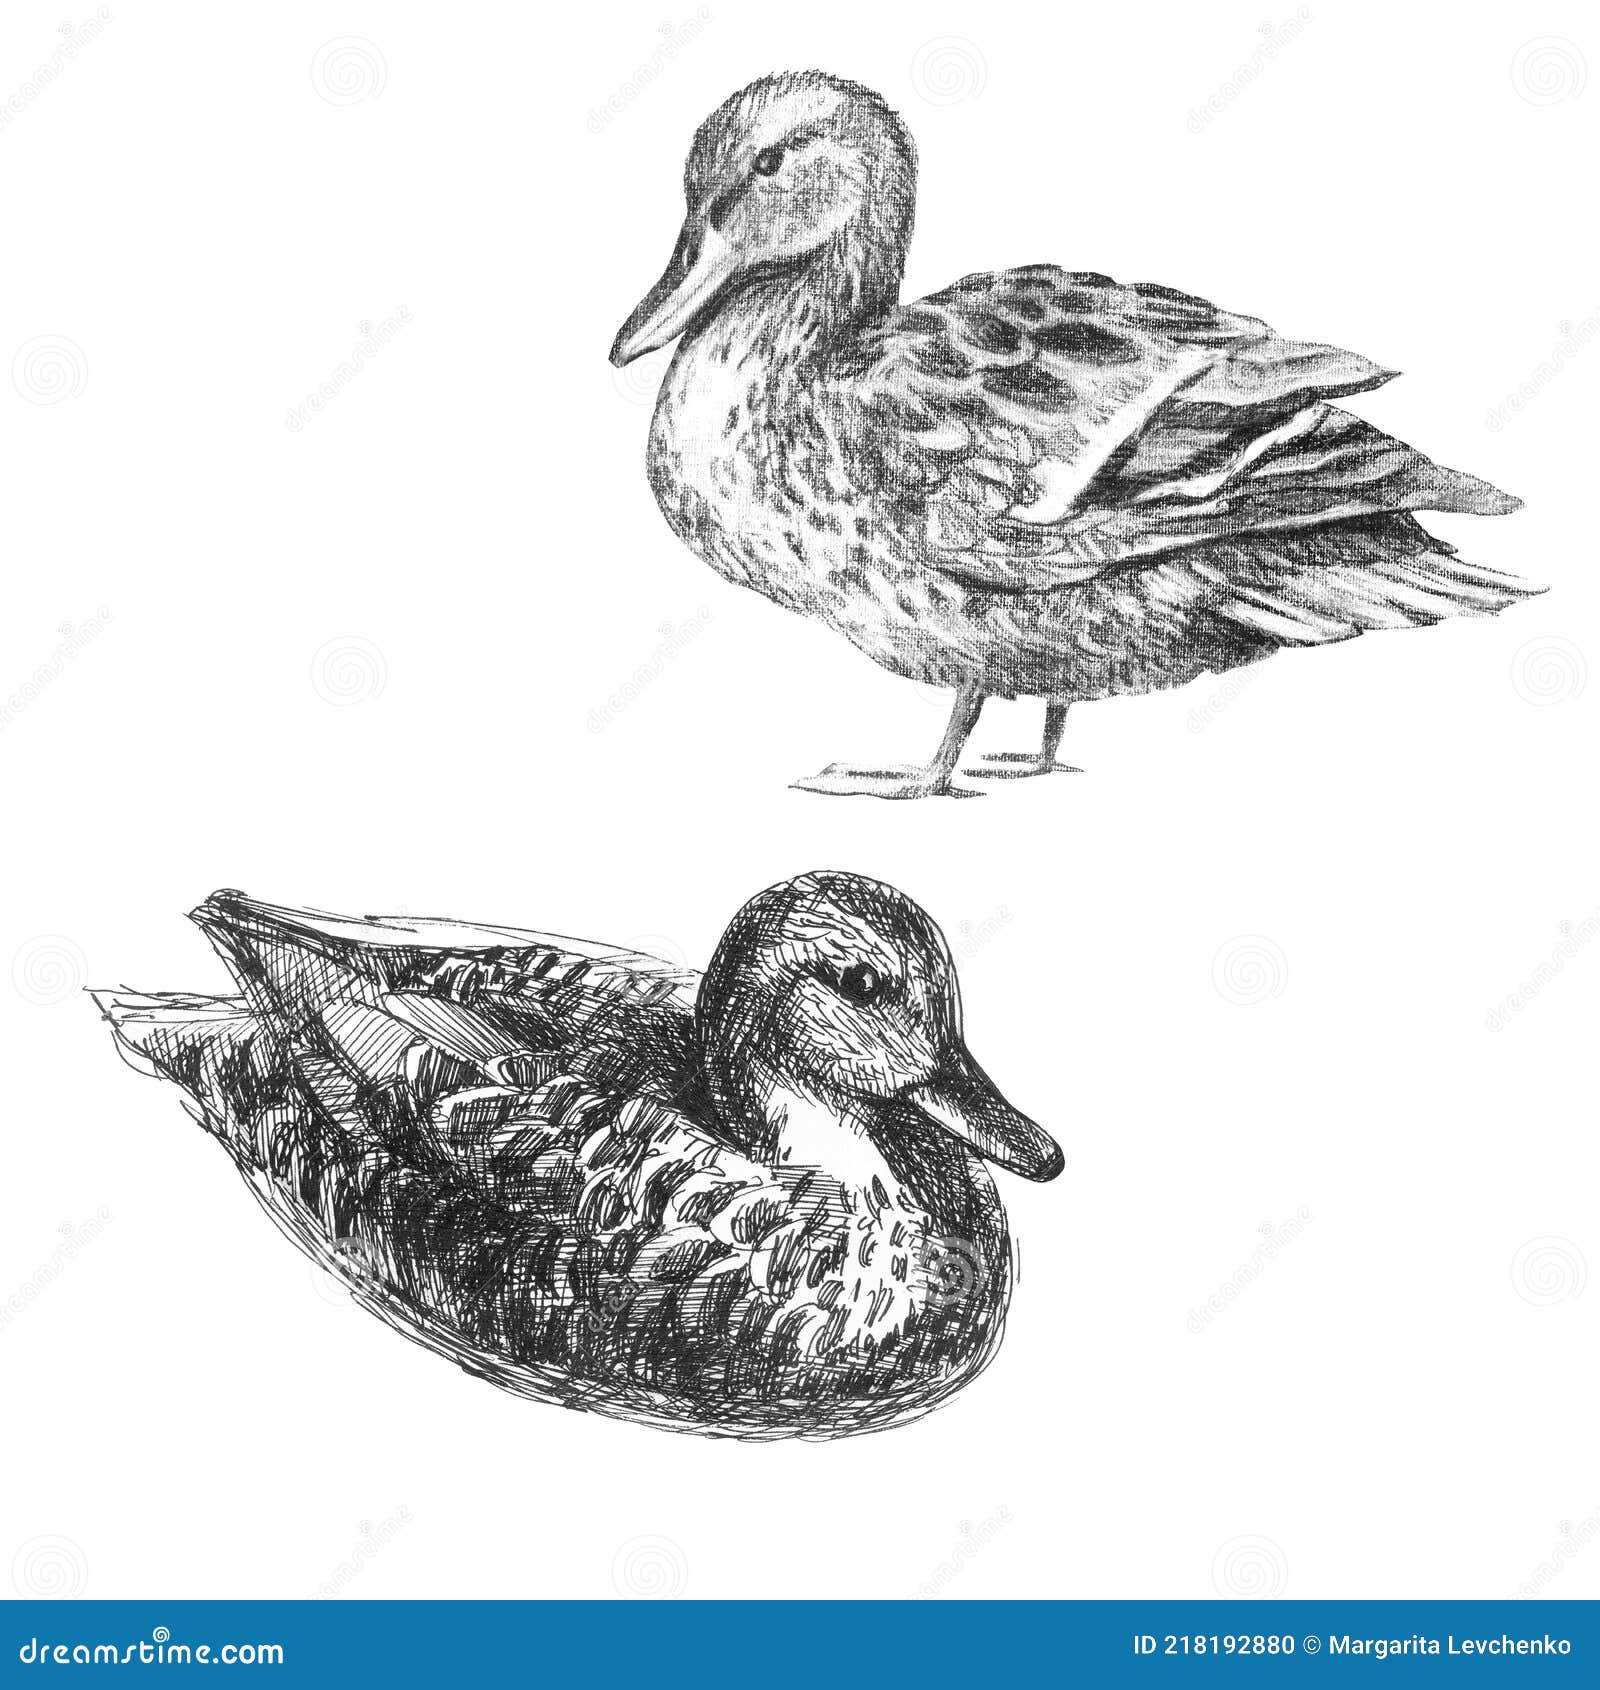 How to Draw a Realistic Duck